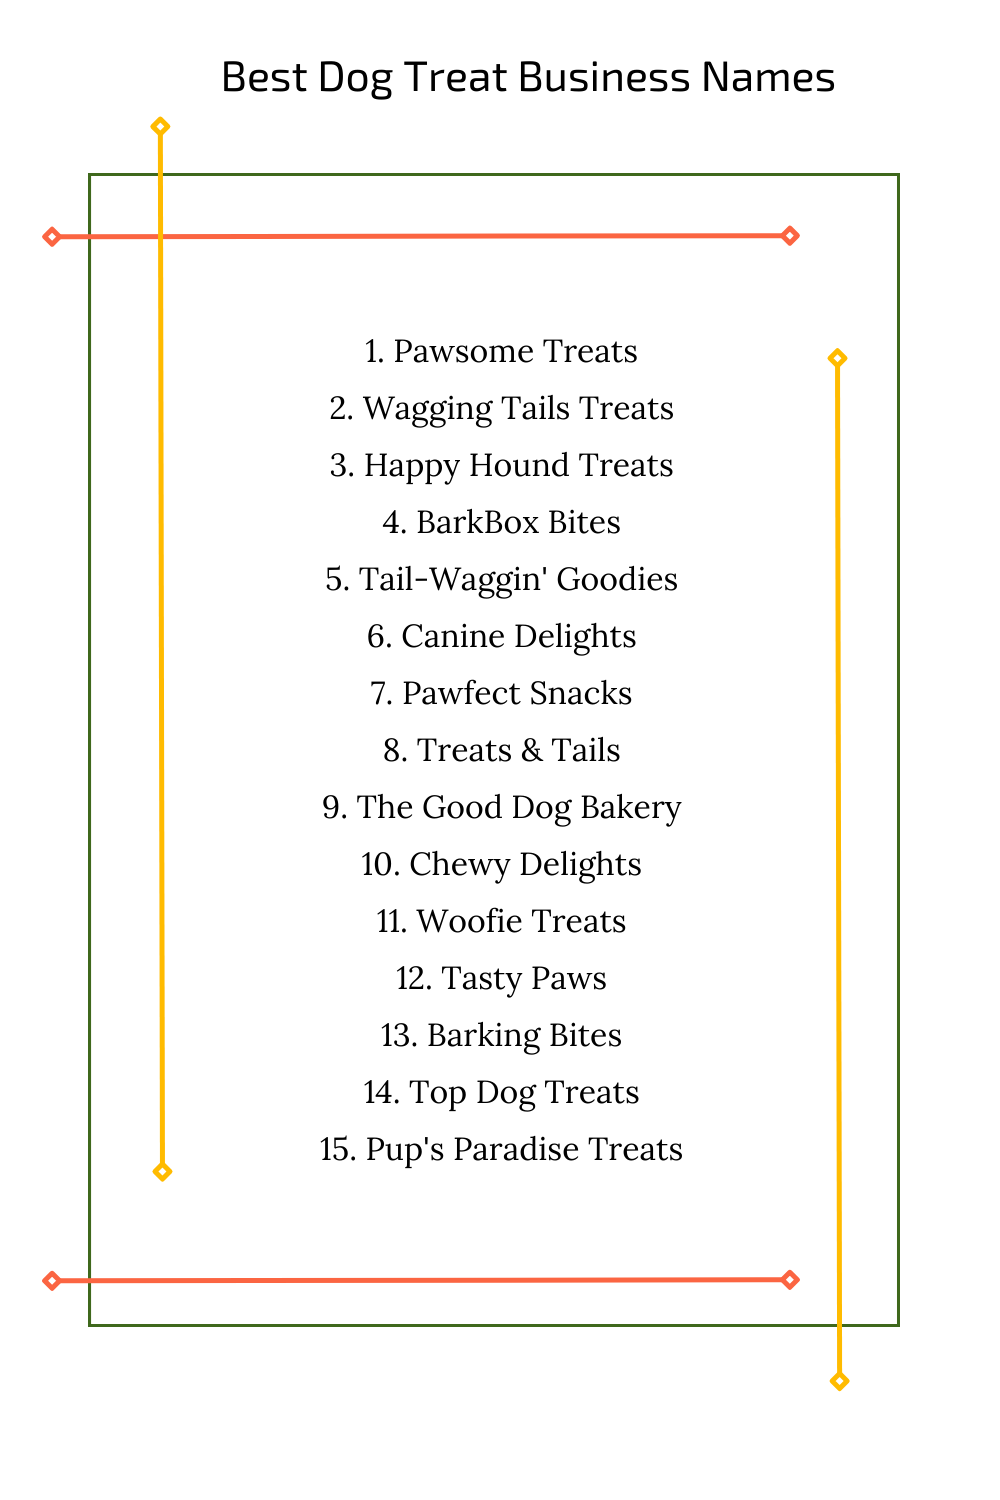 Best Dog Treat Business Names